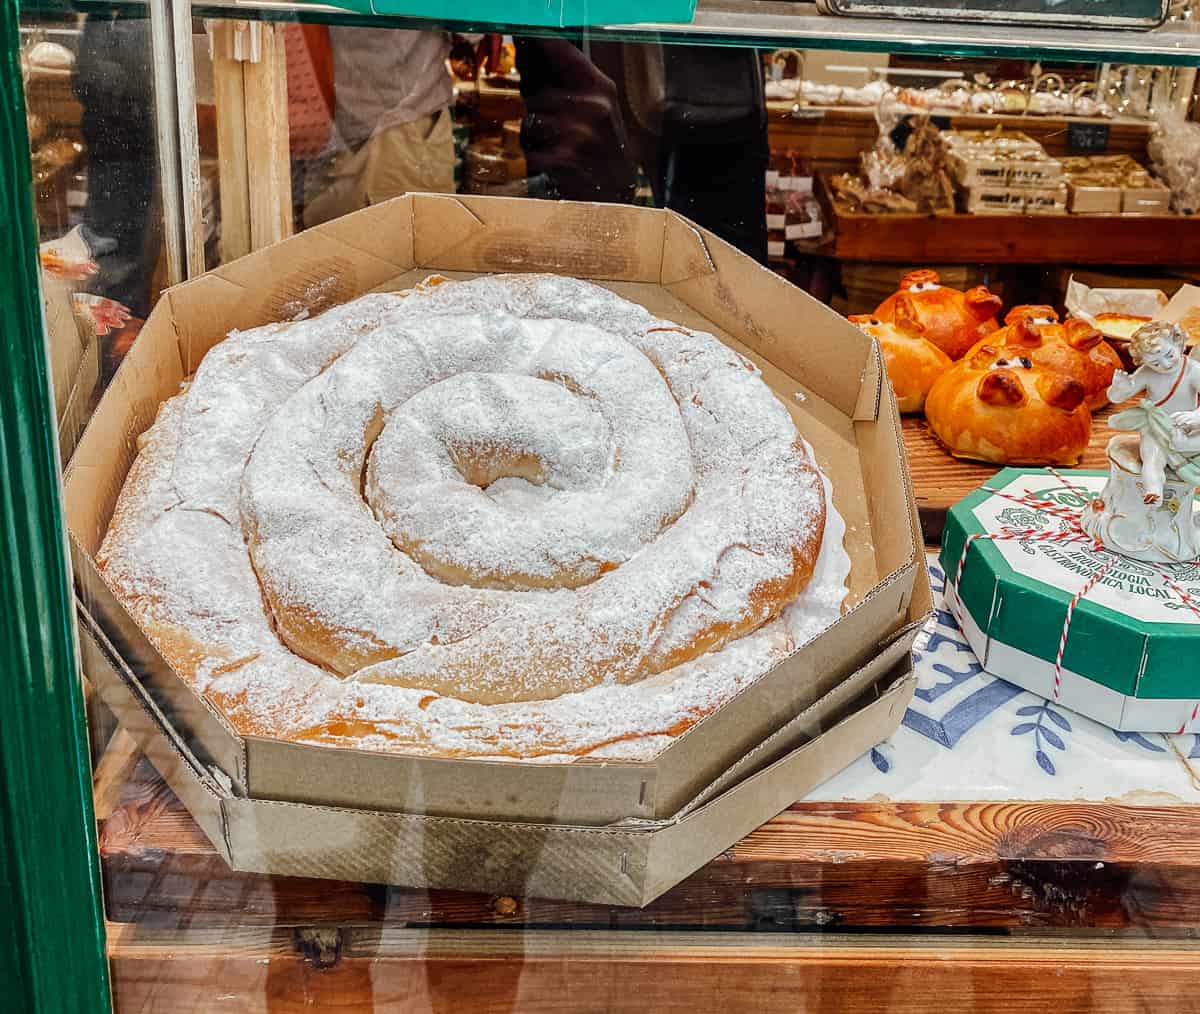 a typical spiral shaped pastry called Ensaïmada from Mallorca